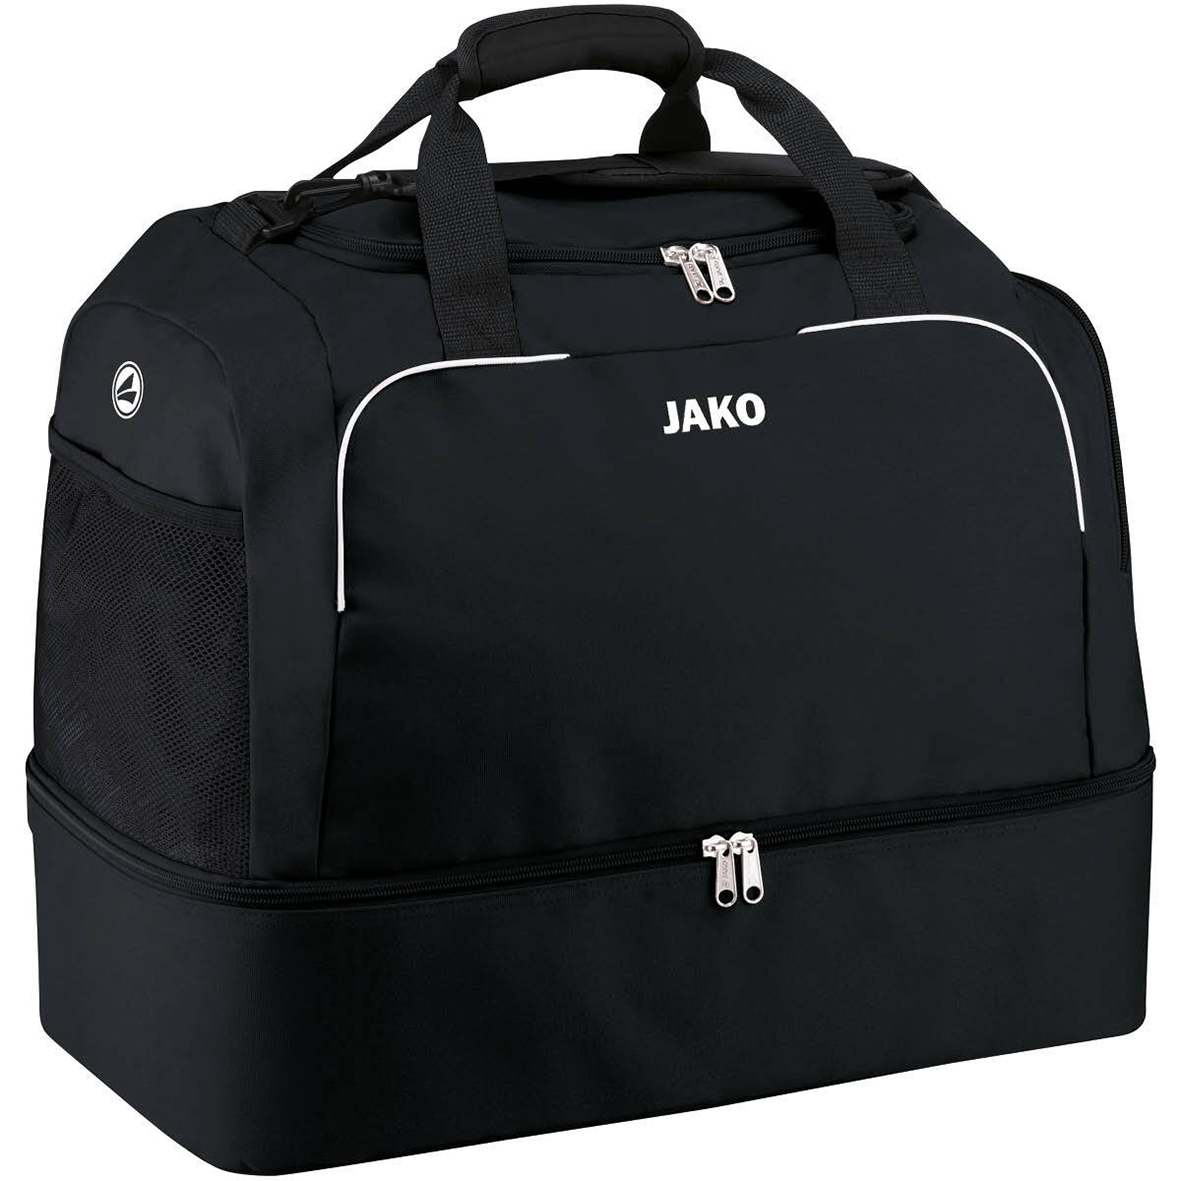 SPORTS BAG JAKO CLASSICO WITH BASE COMPARTMENT, BLACK.